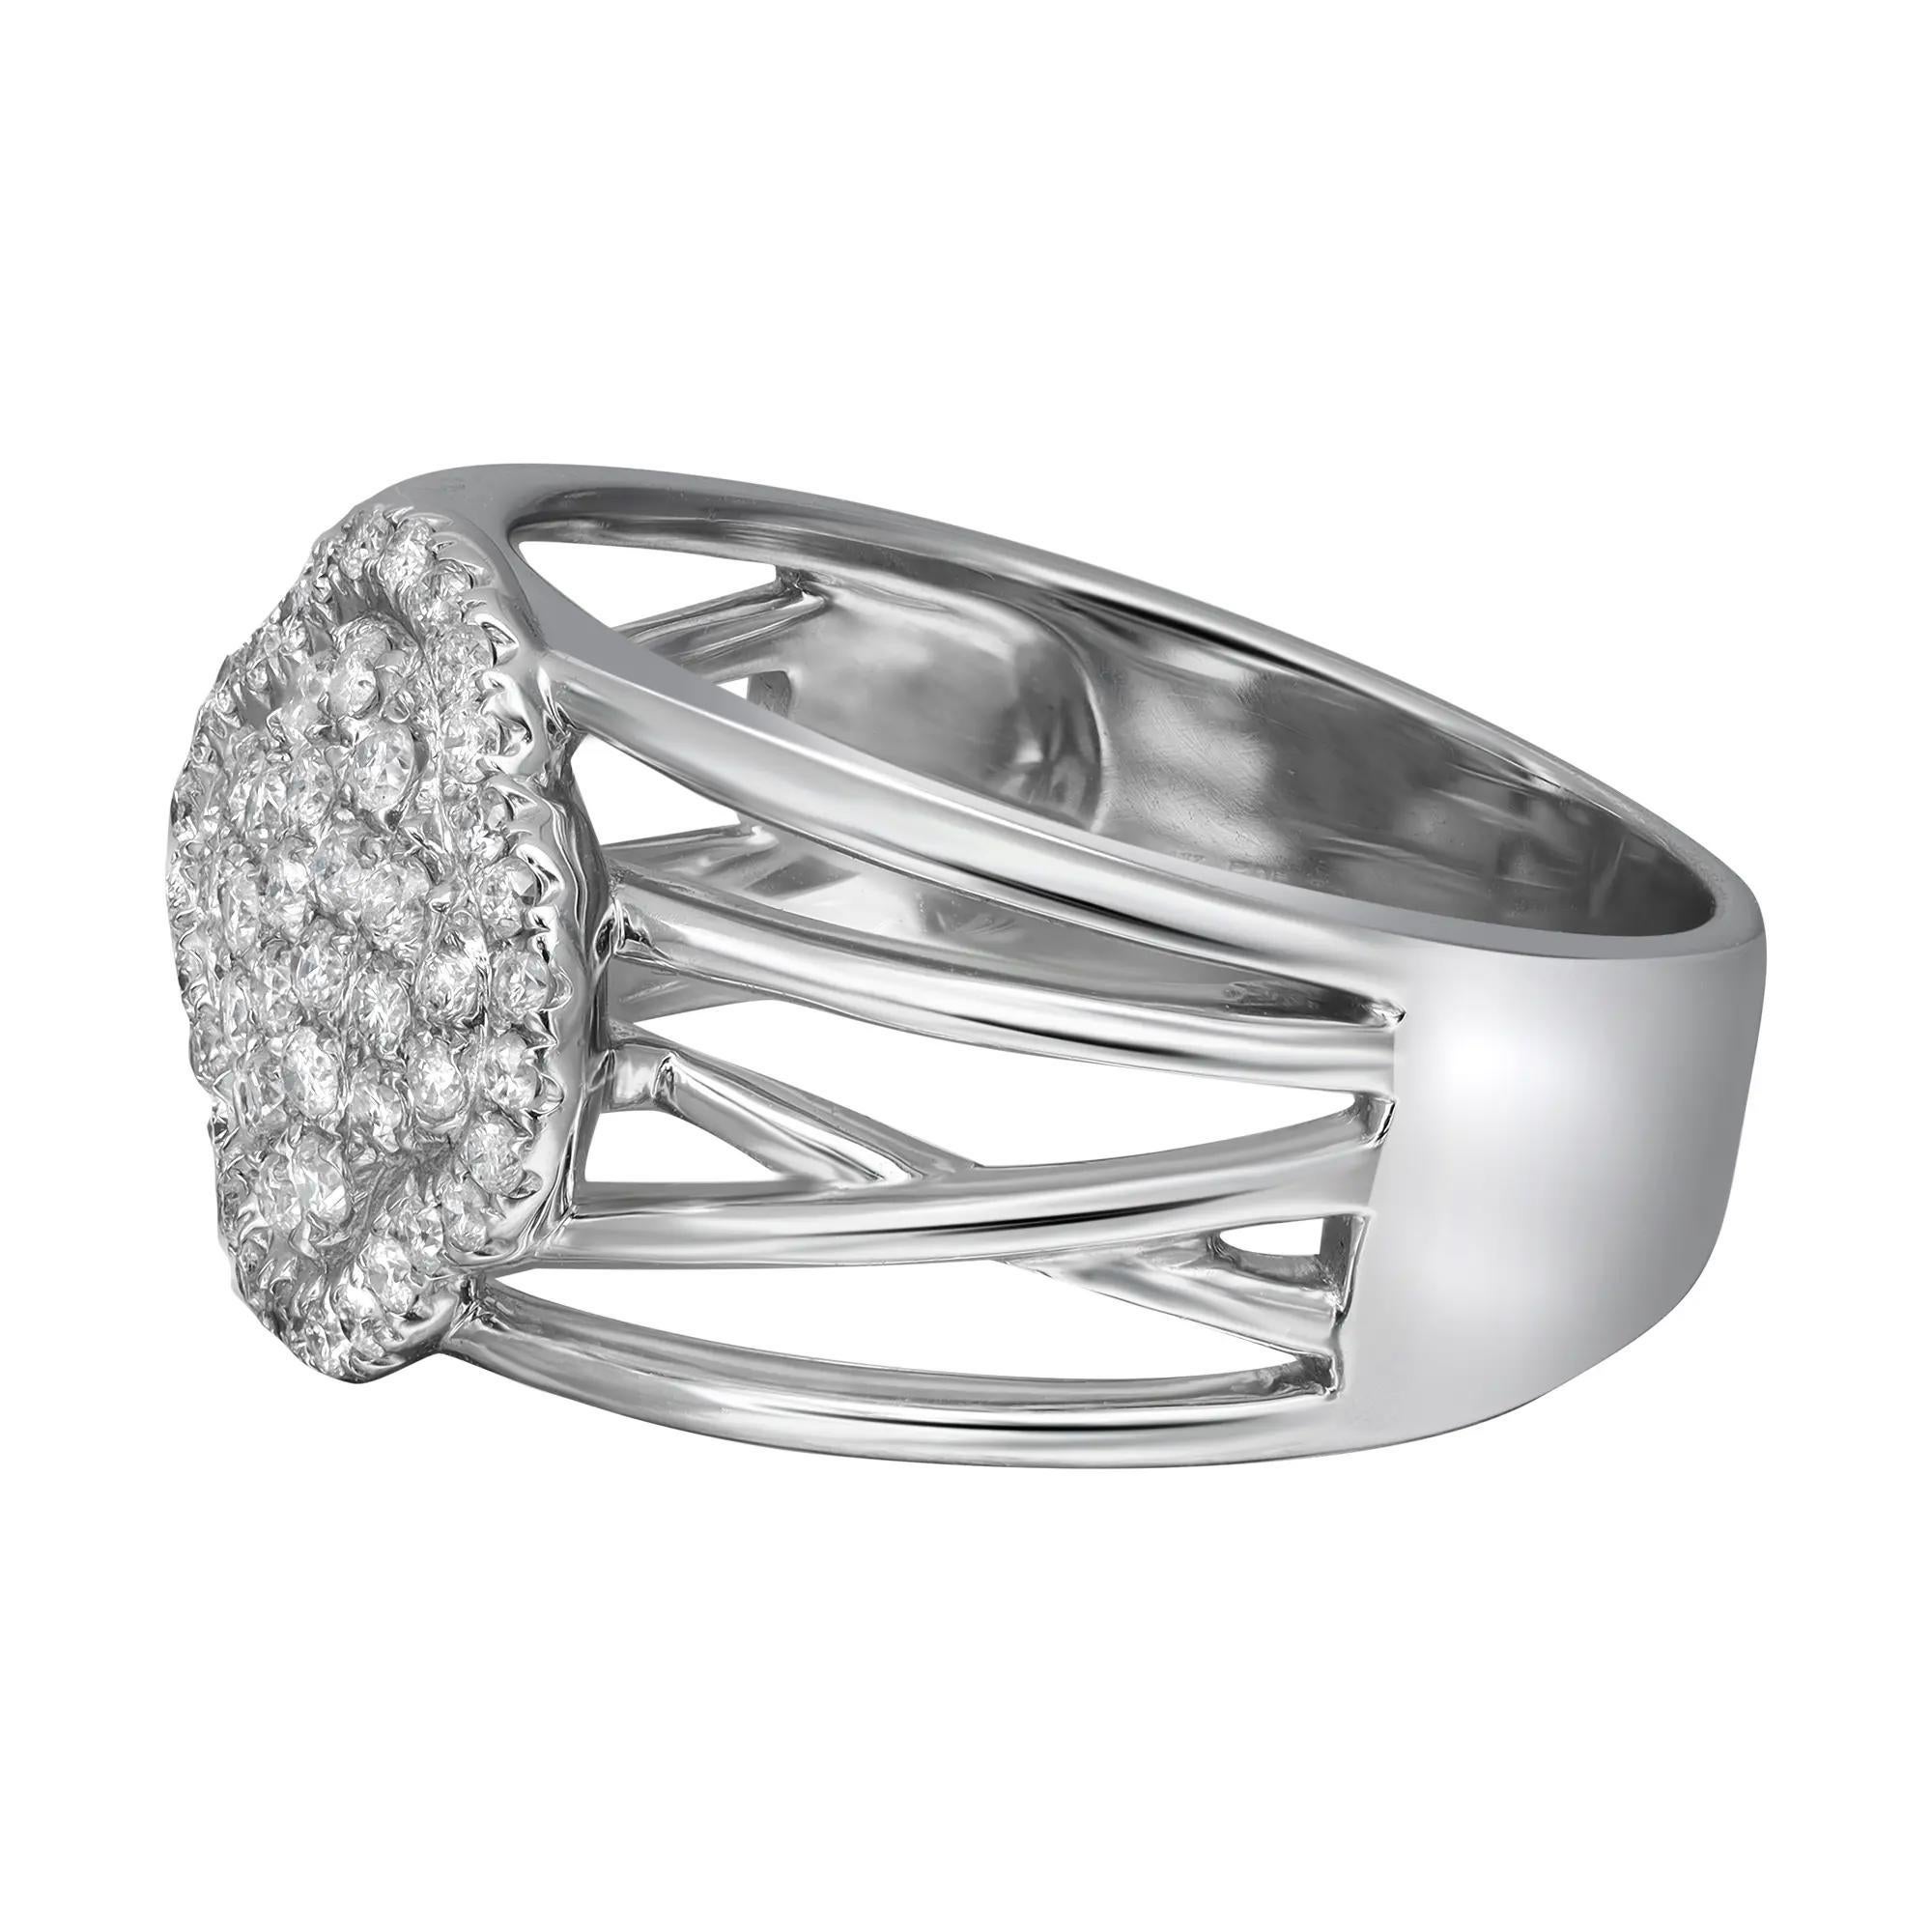 This stunning wide band ring is crafted in high polished 14K white gold. Features prong set with round cut diamonds studded in center motif, totaling 0.45 carat. The diamond color is I with SI clarity. Ring size 7.5. Width of the ring is 12.5 mm.